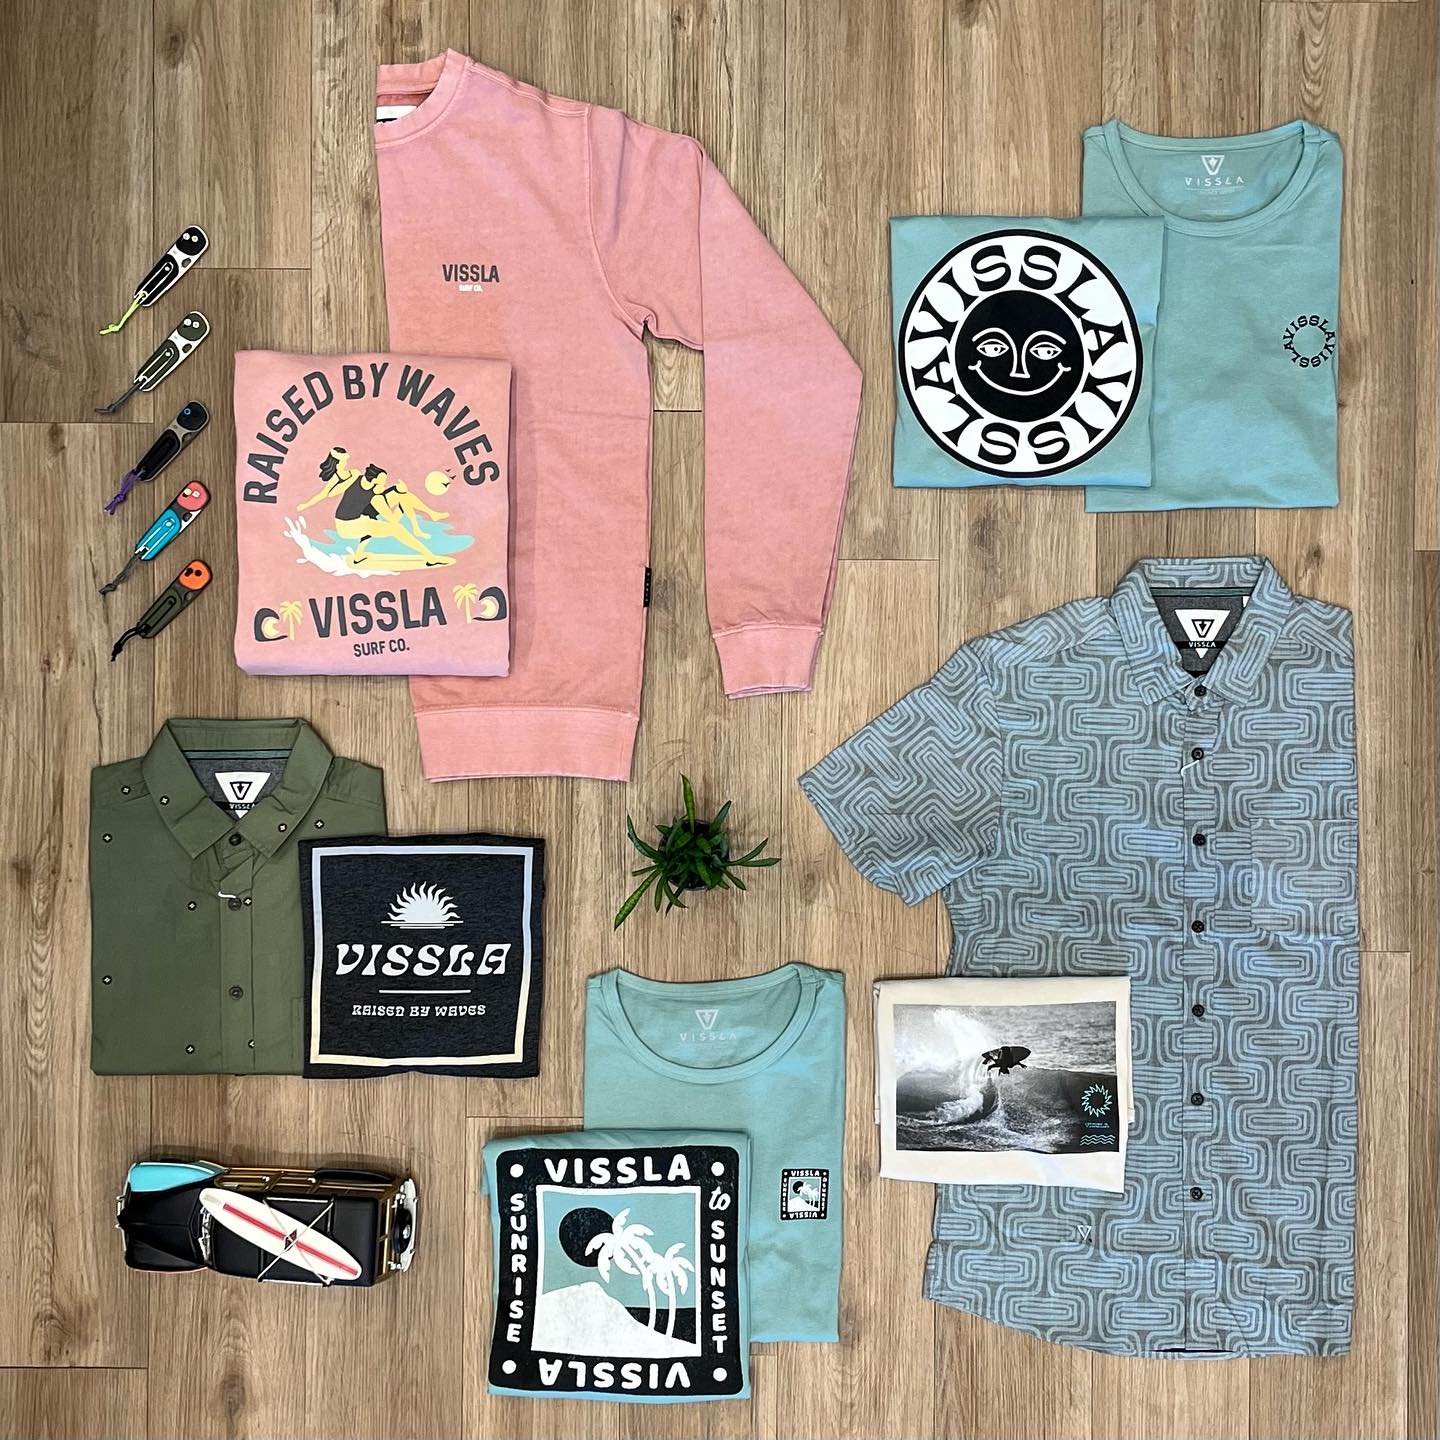 Vissla is a brand that represents creative freedom, a forward-thinking philosophy, and a generation of creators and innovators. They embrace the modern do-it-yourself attitude within surf culture, performance surfing, and craftsmanship. They constant